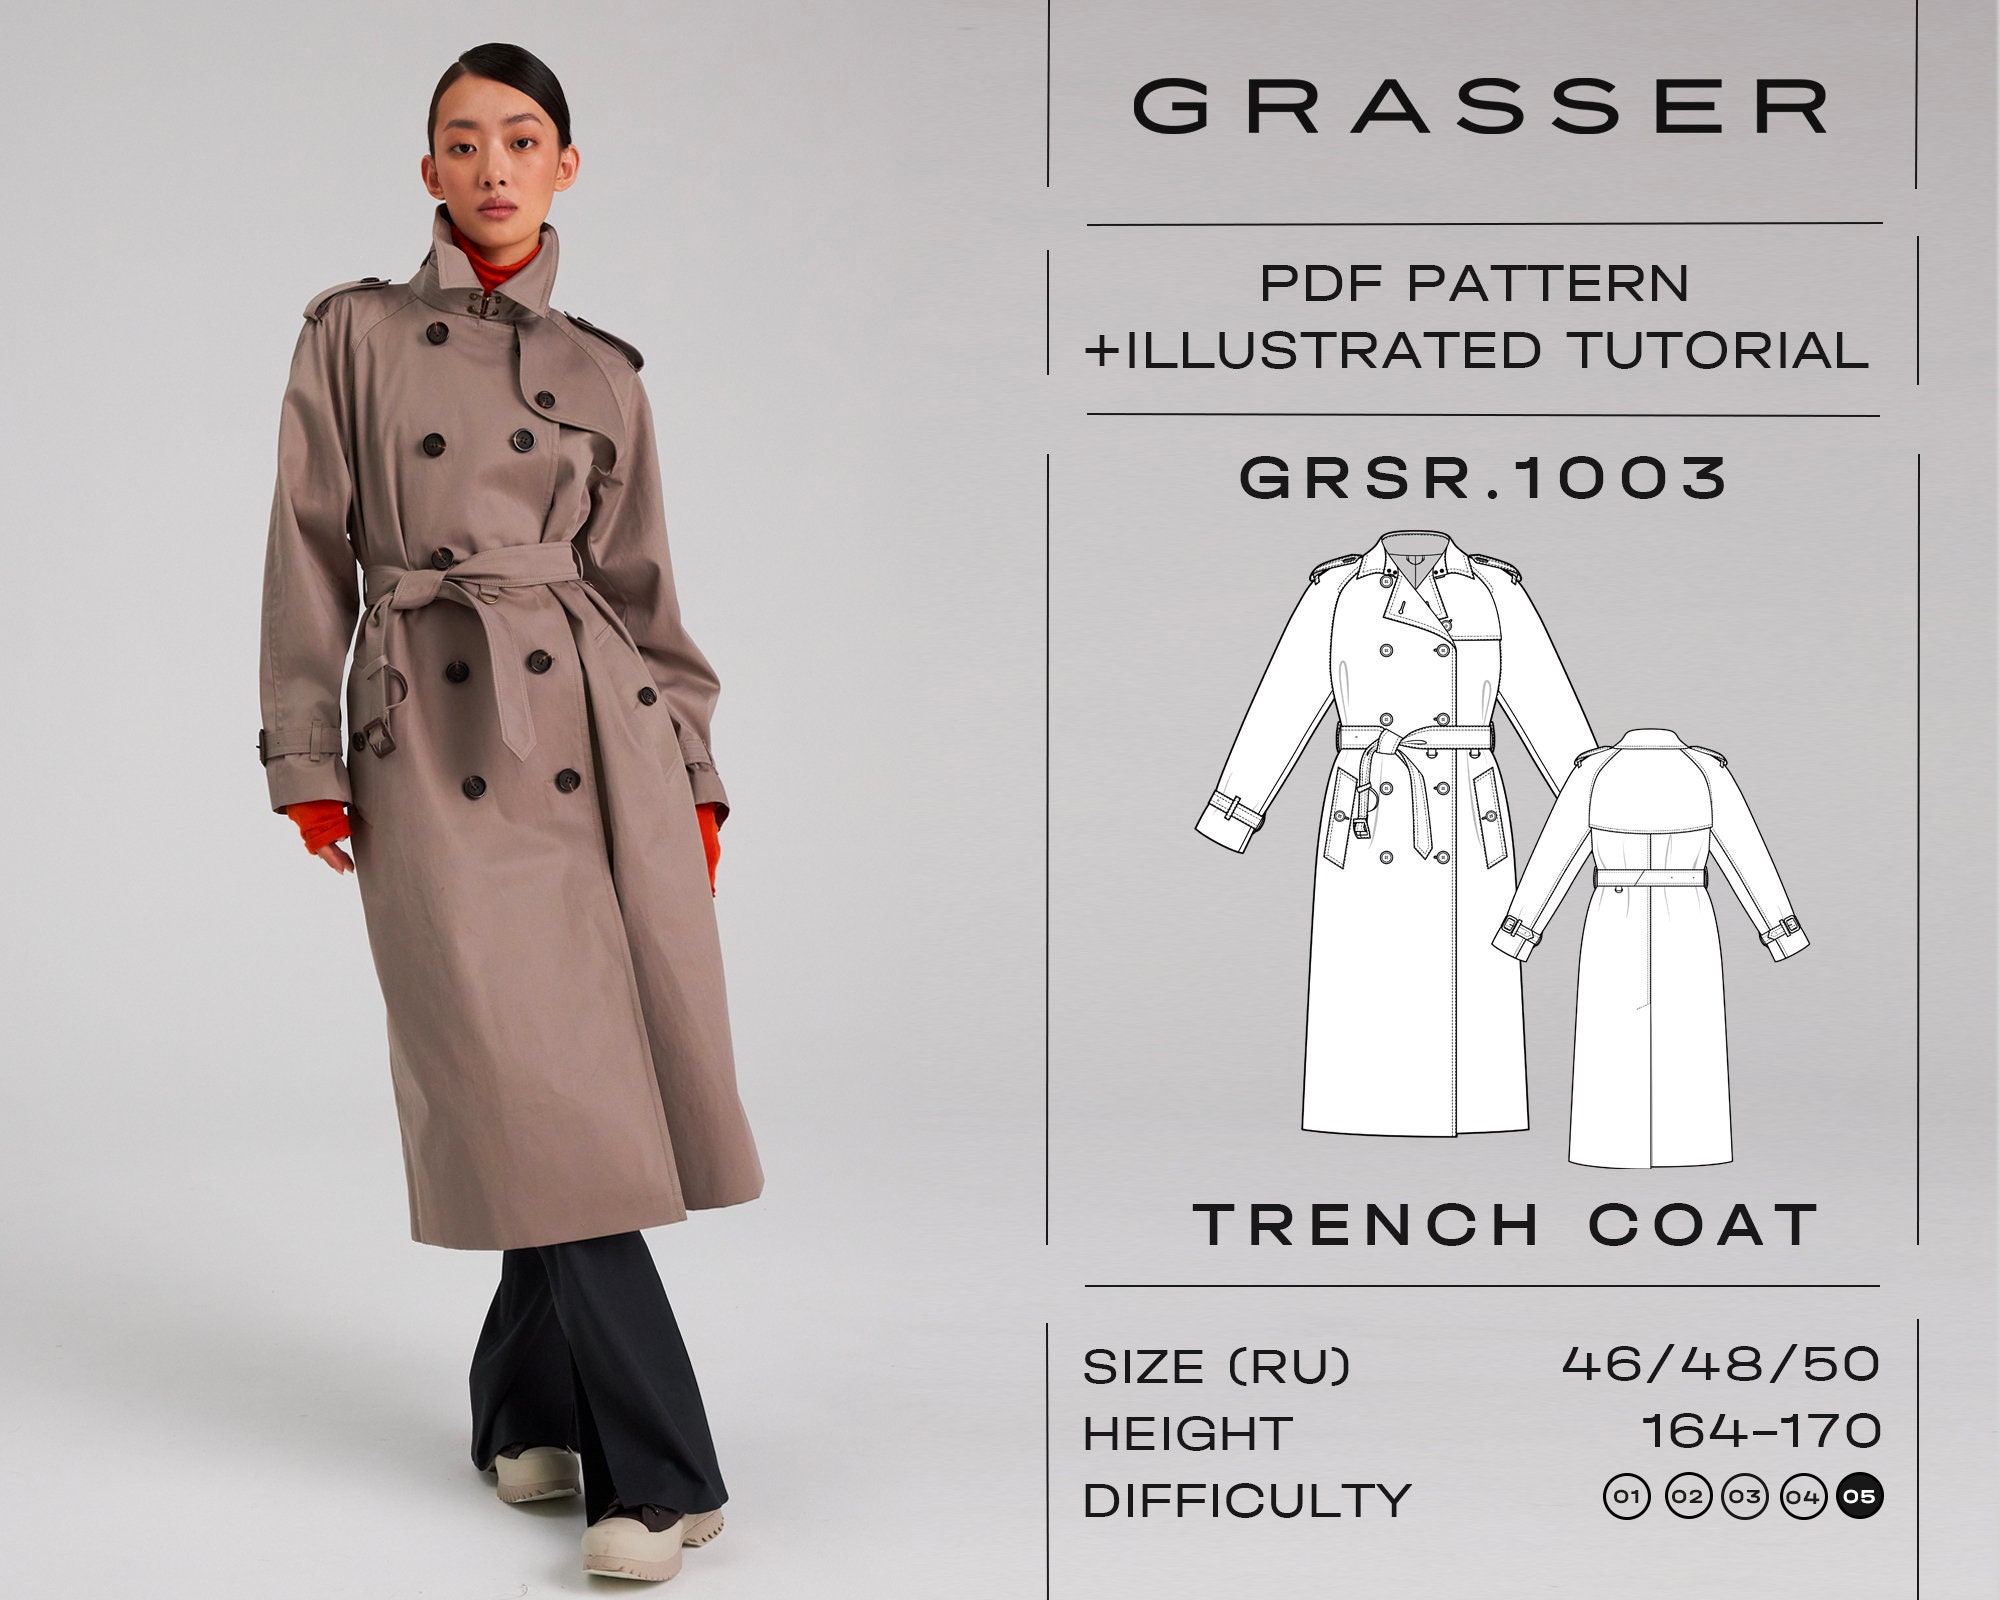 Introducing the Chilton Trench Coat: a curvy and plus size coat